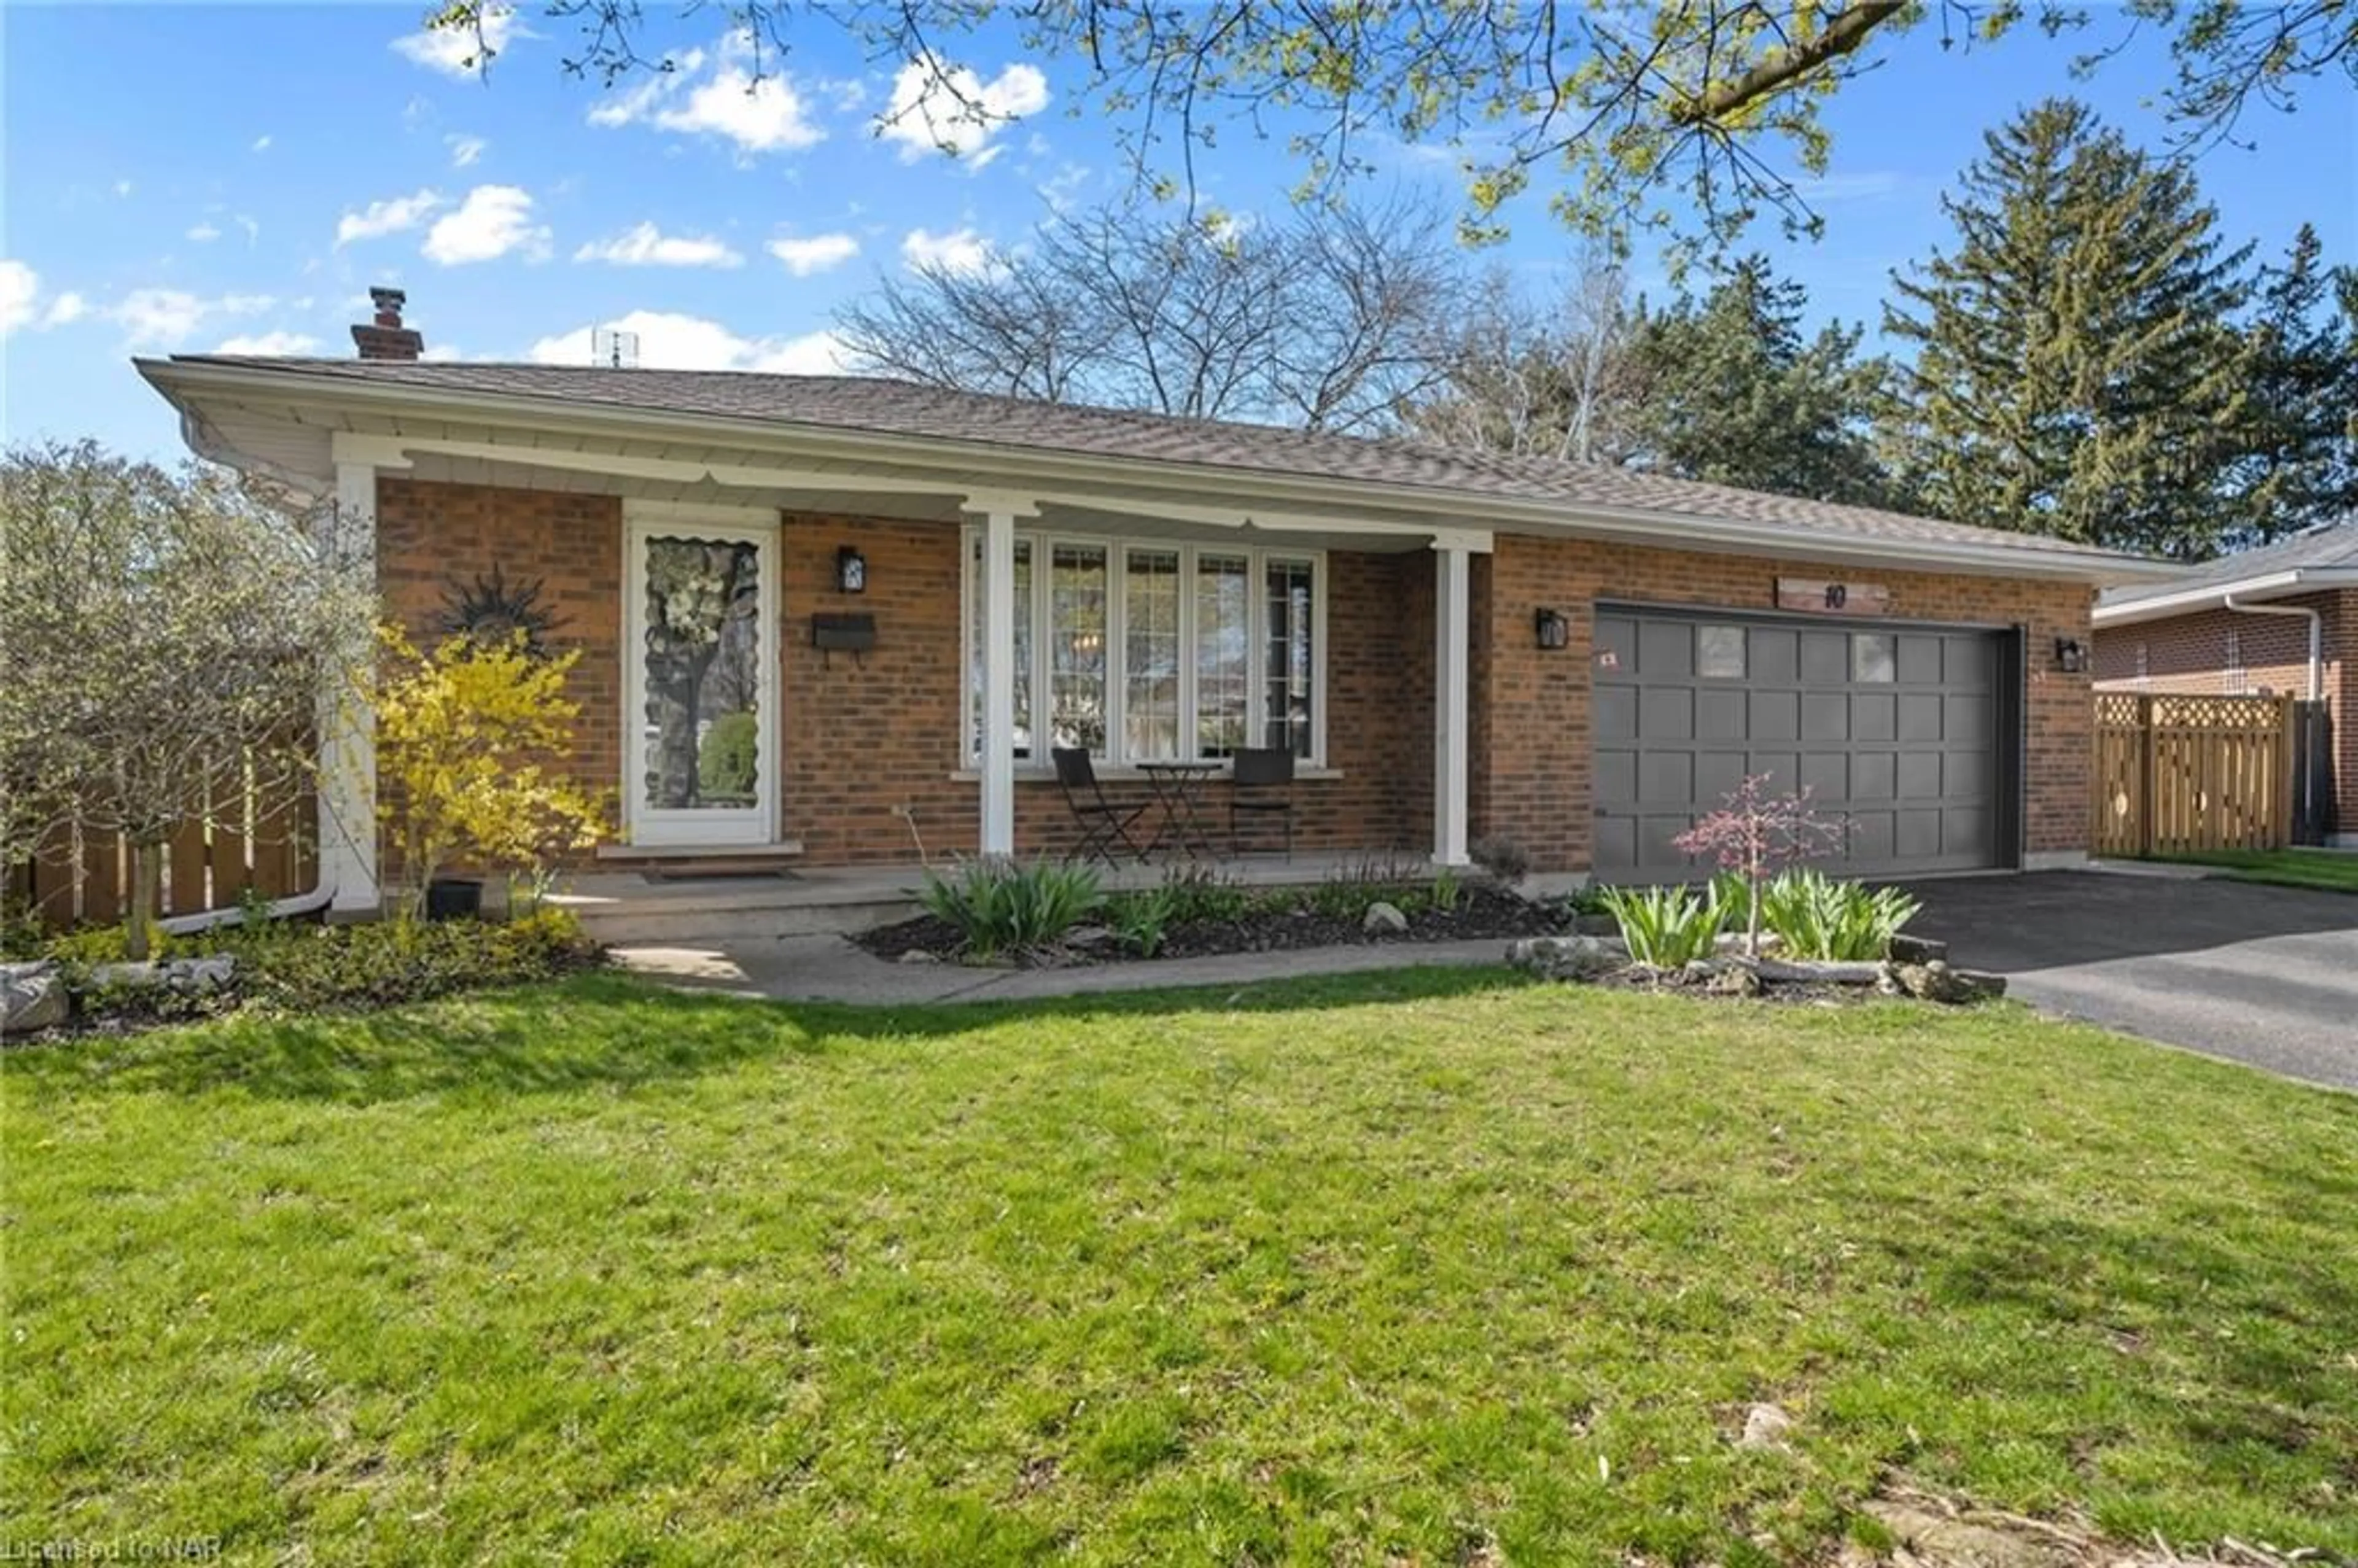 Home with brick exterior material for 10 Jolie Crt, St. Catharines Ontario L2M 6V6